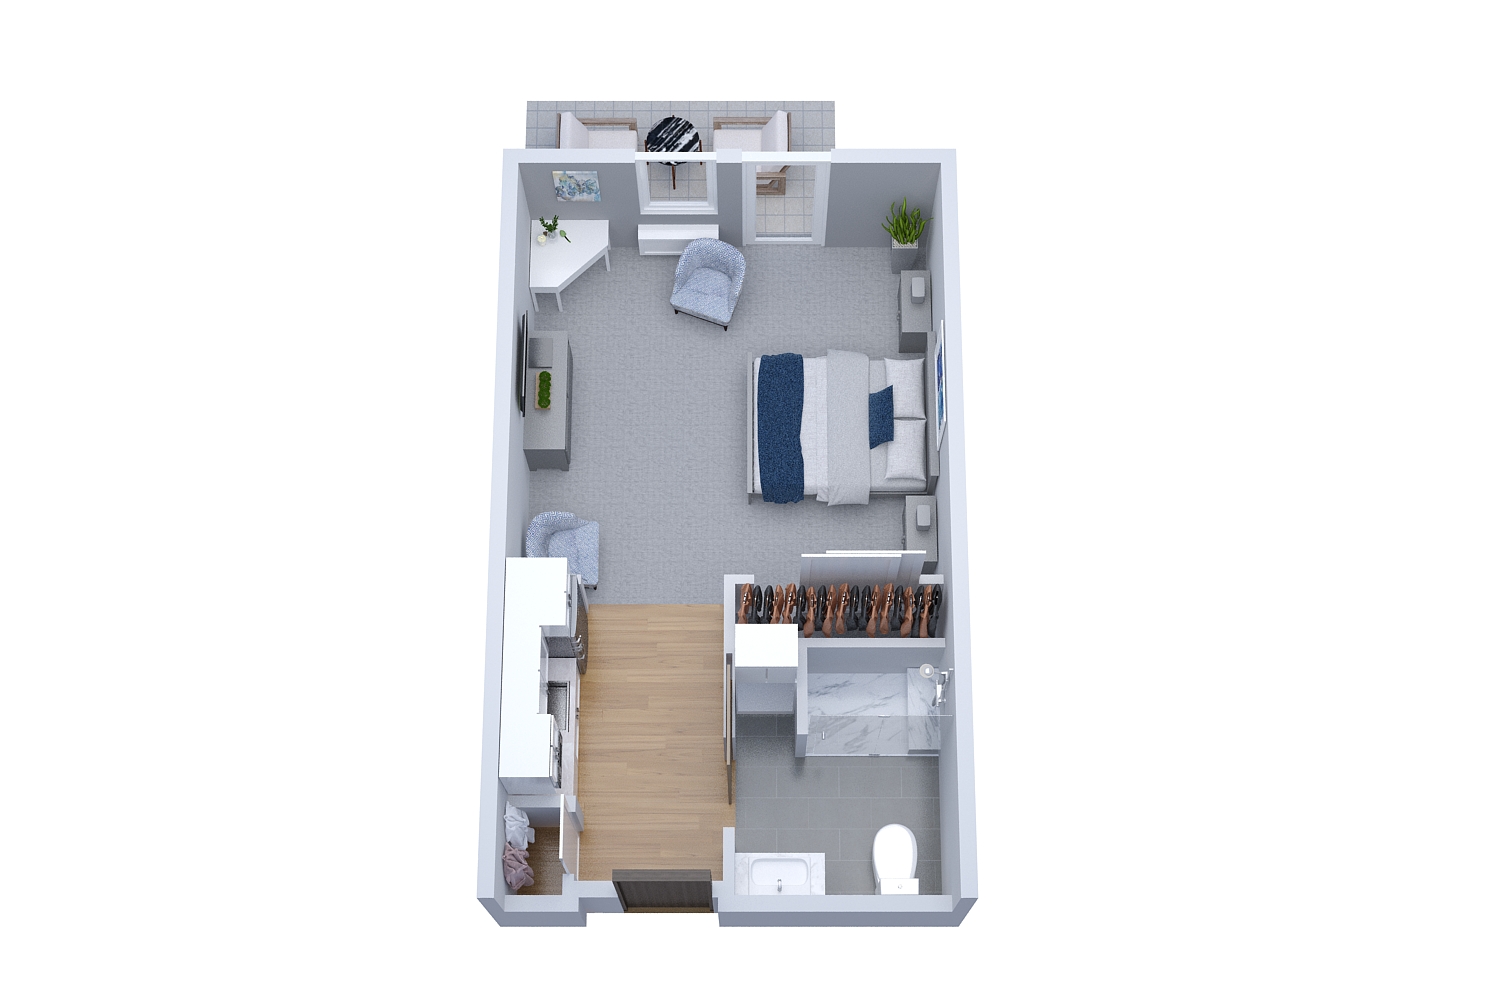 The Woods - Assisted Living - Suite 3D Floor Plan